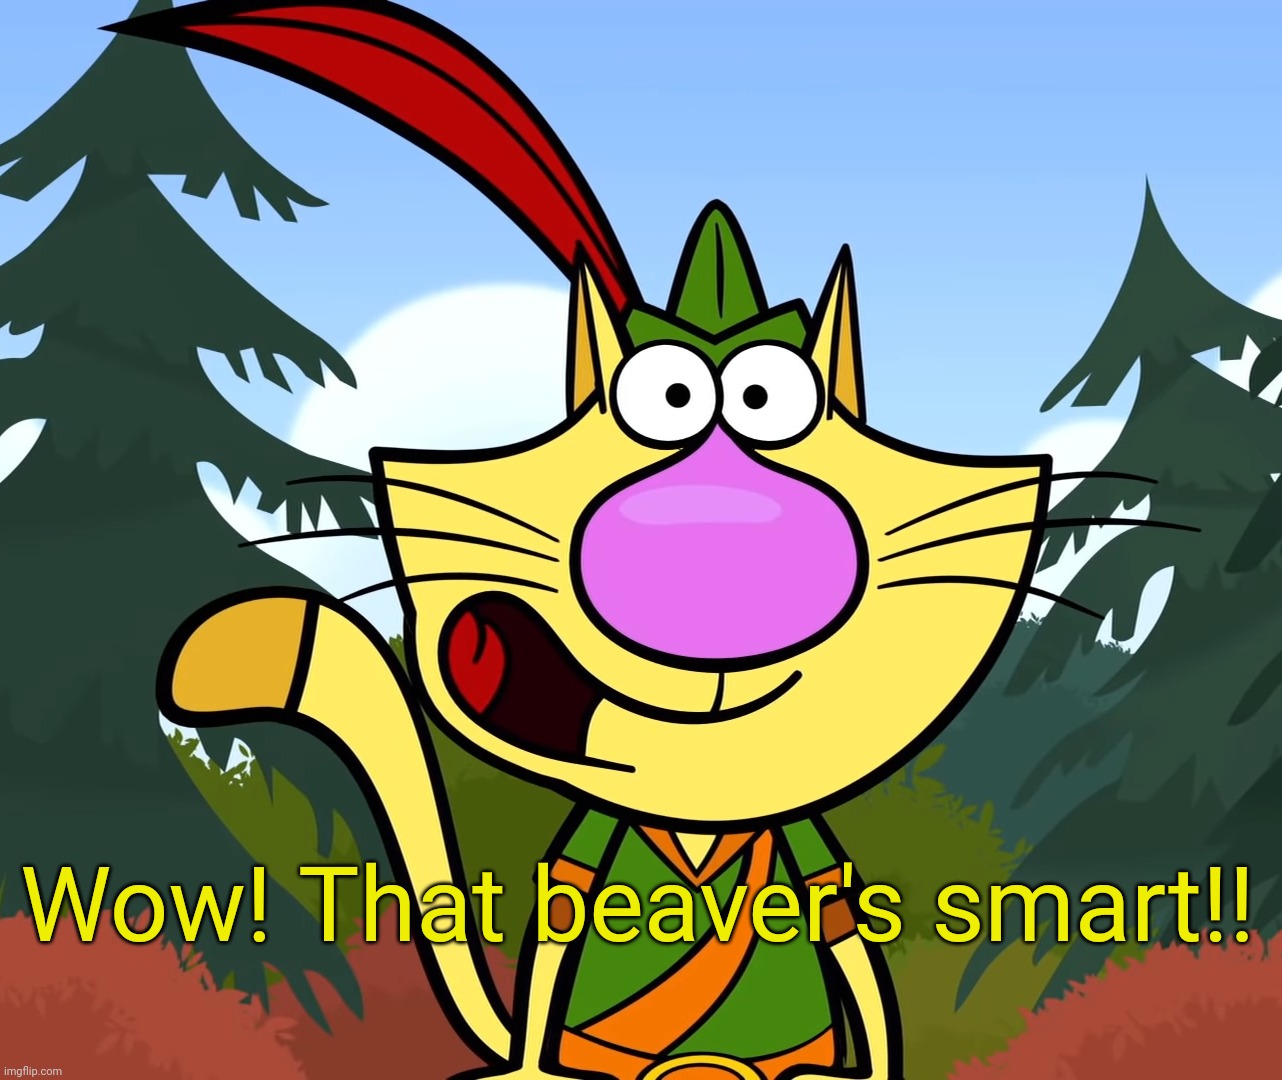 No Way!! (Nature Cat) | Wow! That beaver's smart!! | image tagged in no way nature cat | made w/ Imgflip meme maker